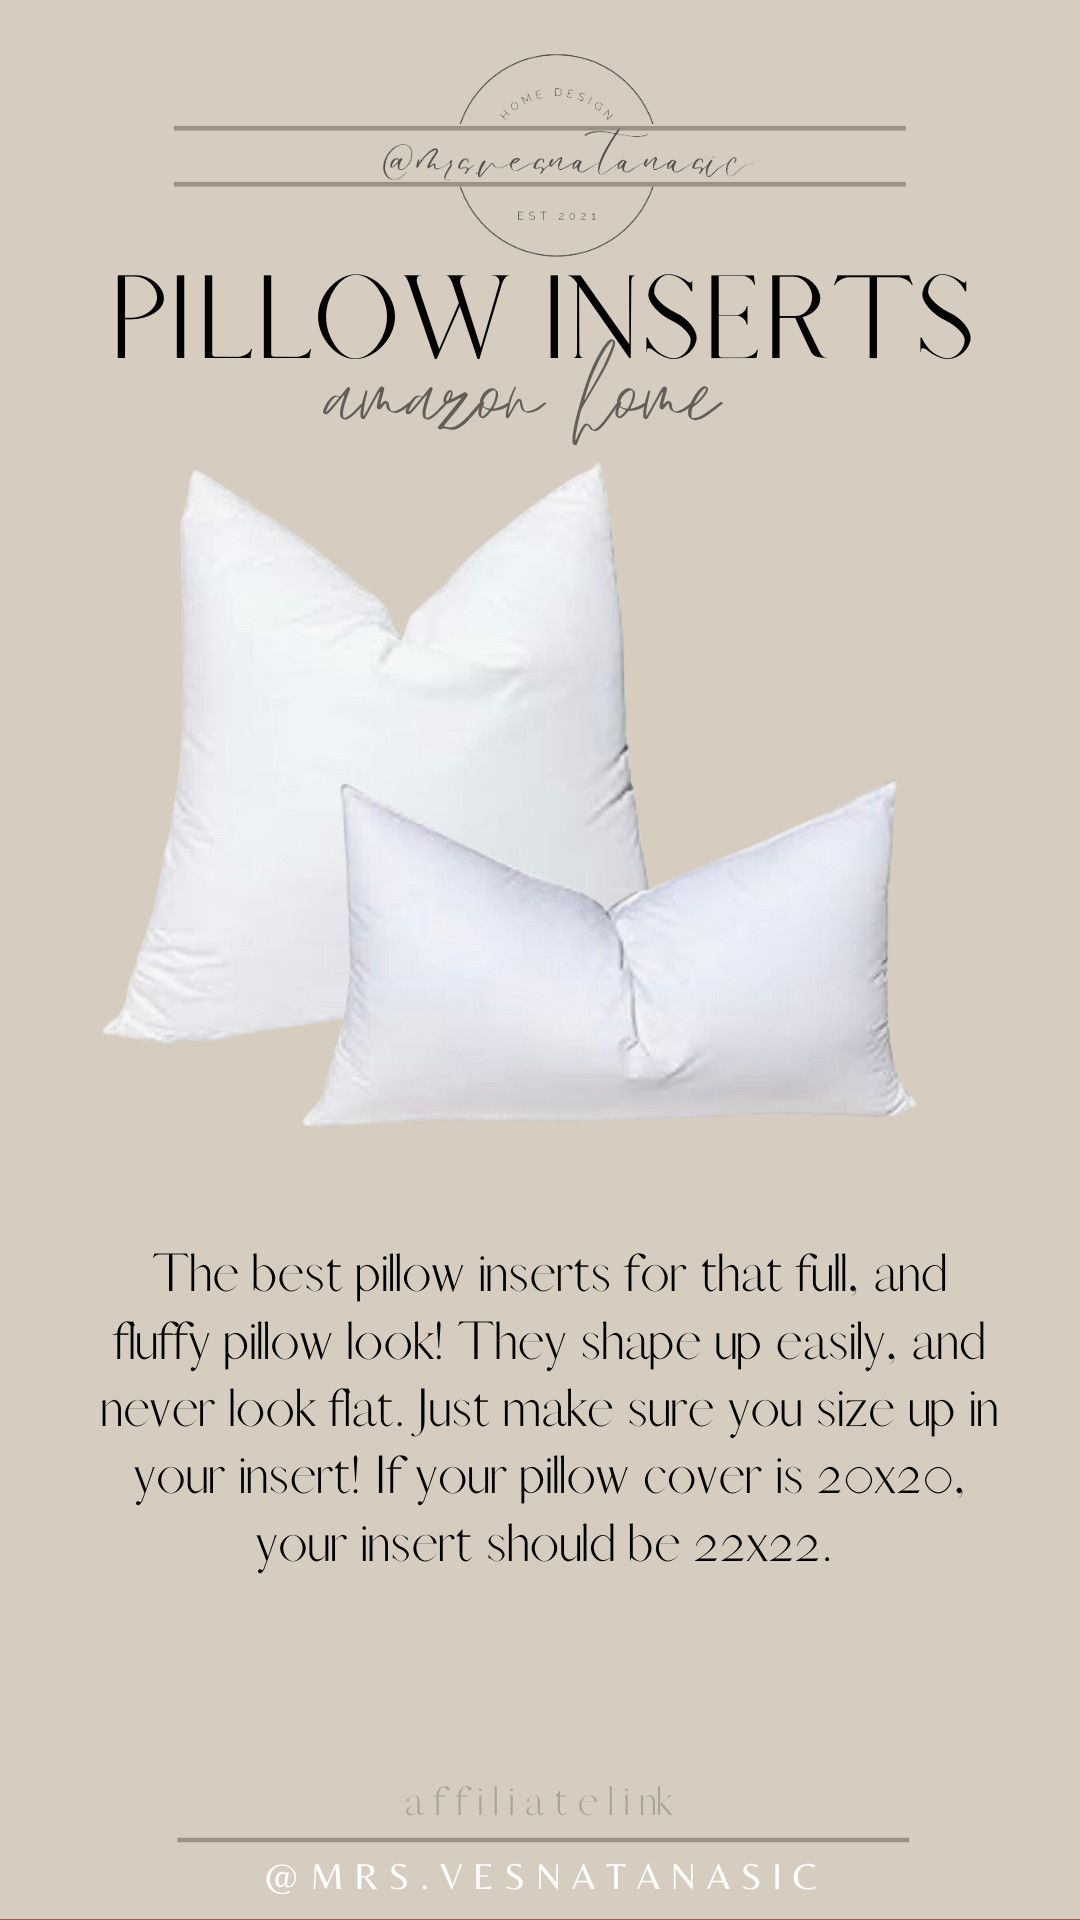 The best pillow inserts! | Amazon (US)